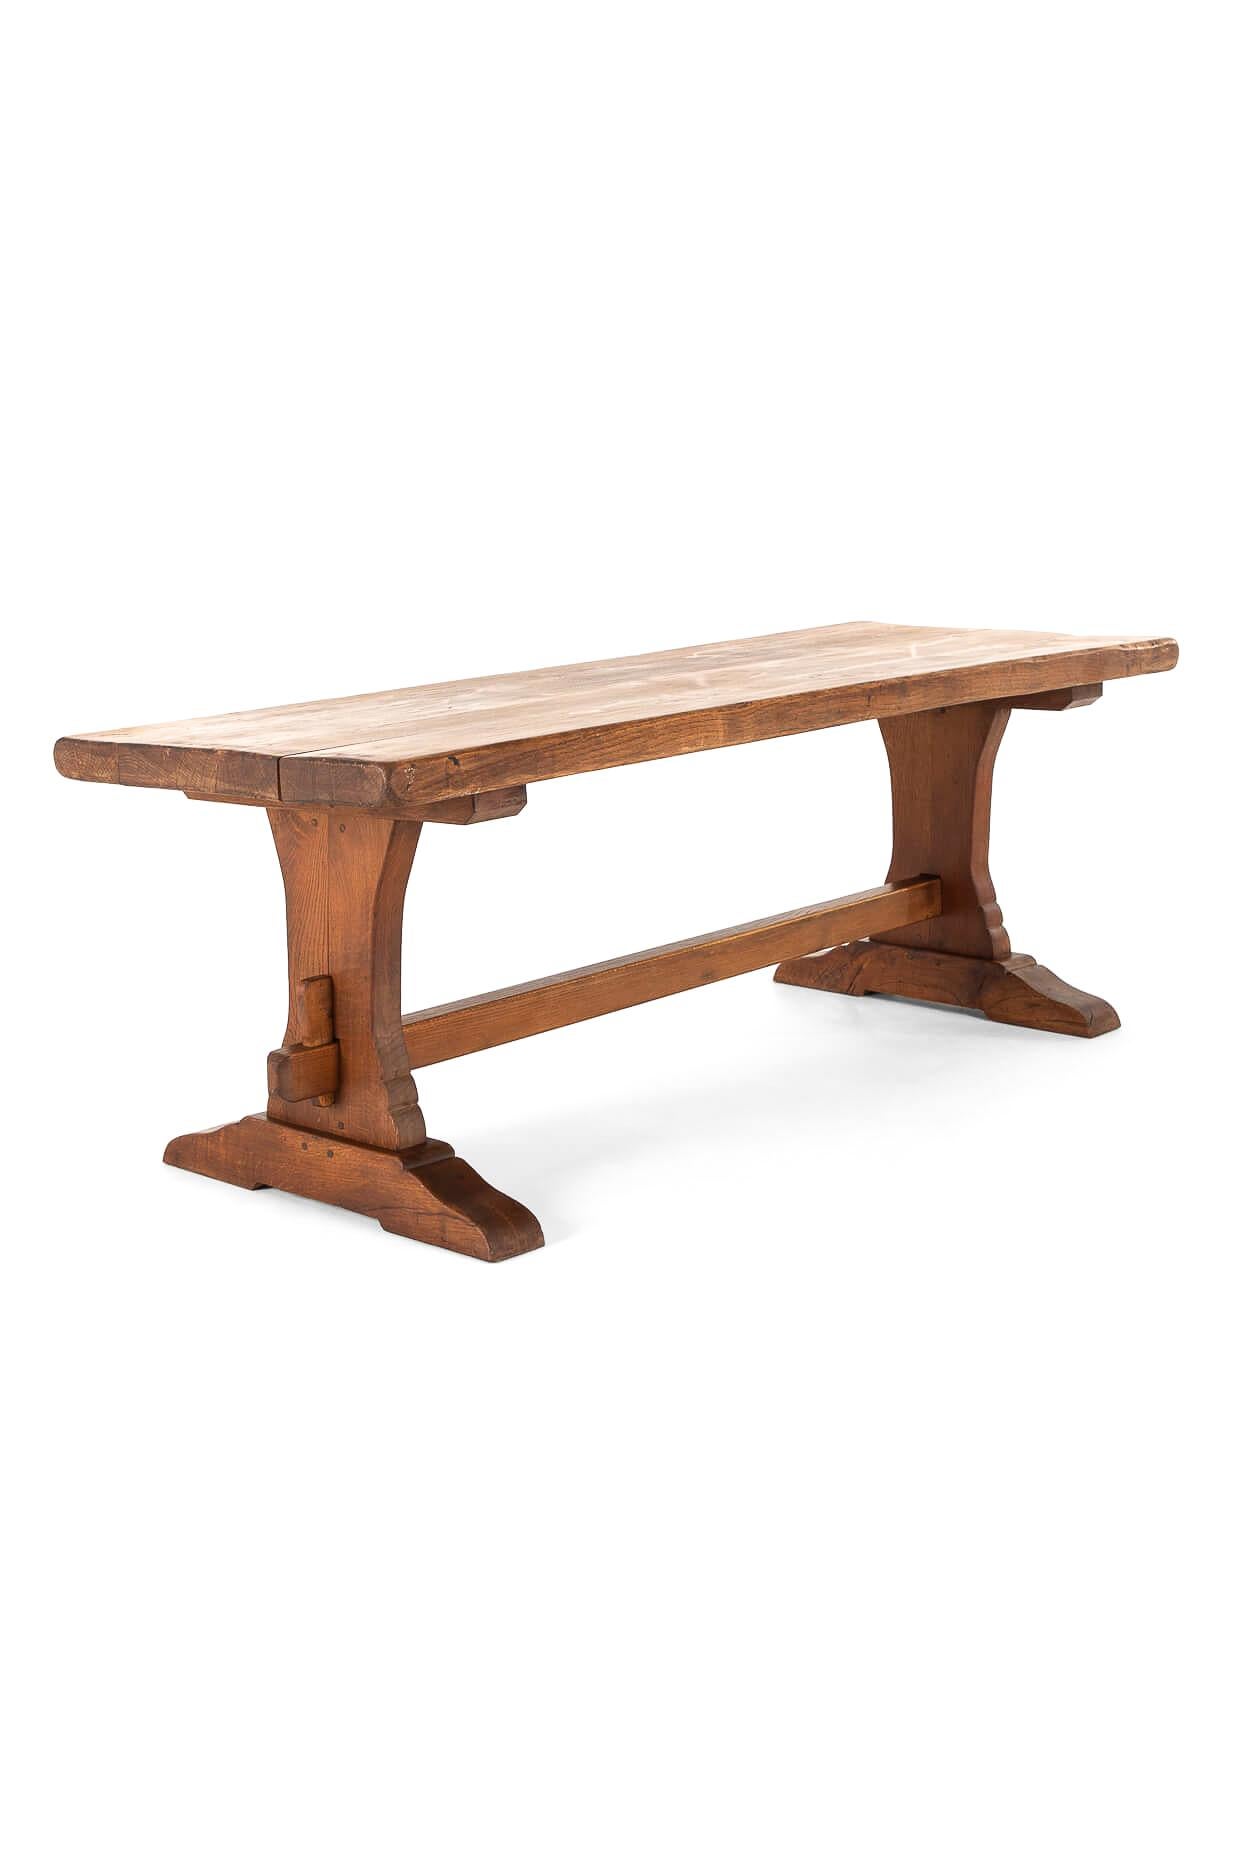 A superb French oak monastery table with a generous three-plank top.

The top is supported on a large trestle base, and united with a single stretcher secured at each end with oak pegs.

The sturdy table is expertly crafted, strengthened with